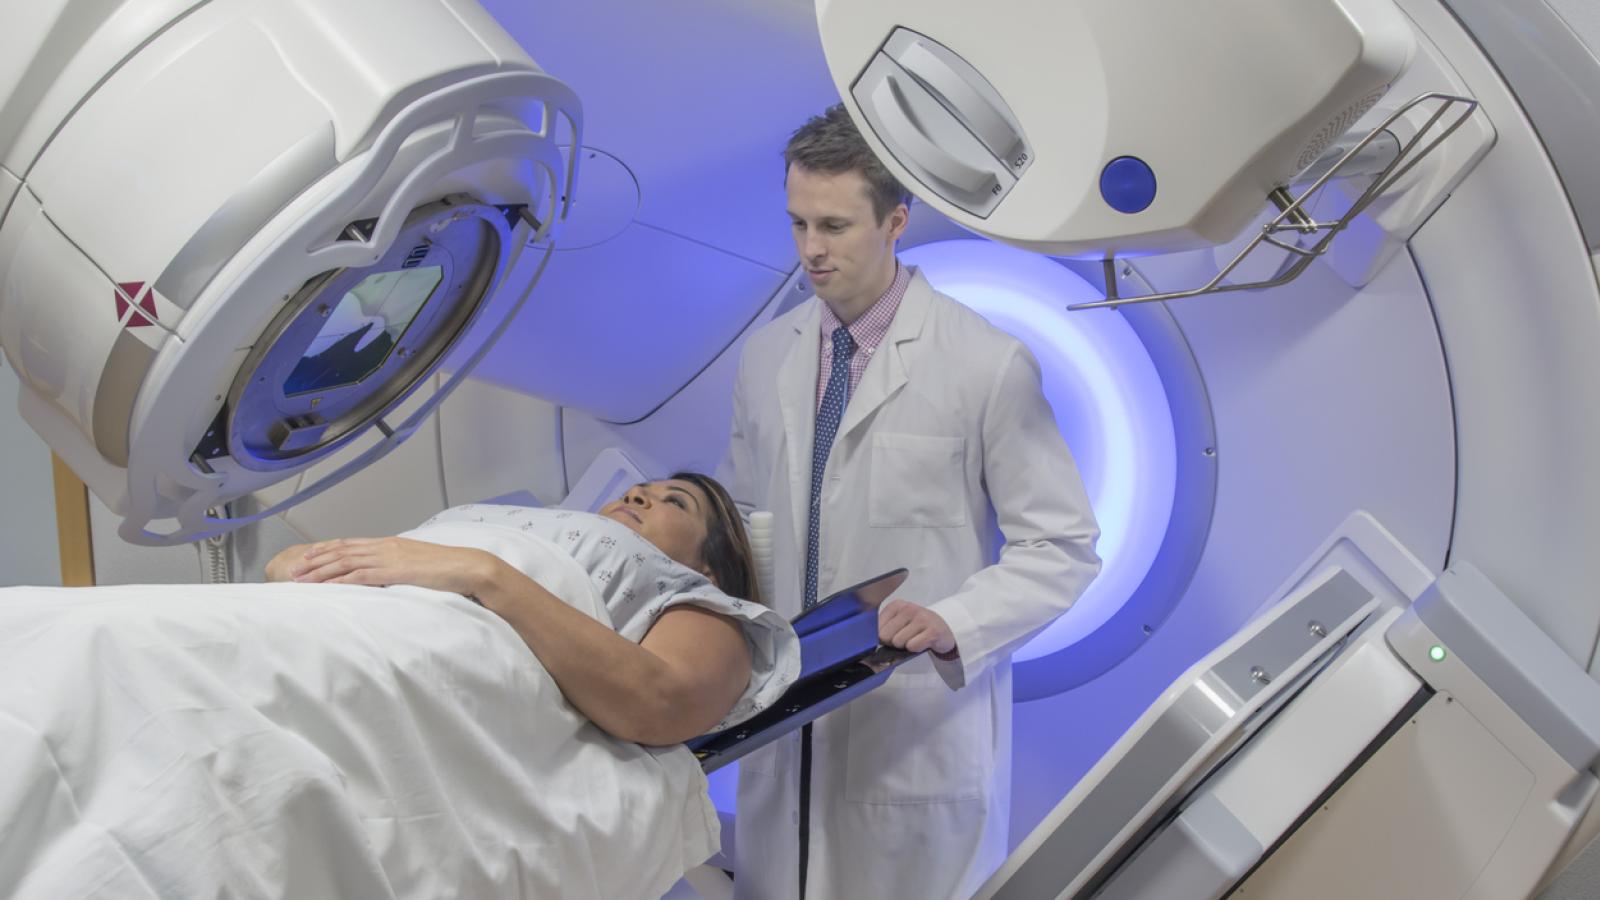 A lady is lying under a radiotherapy machine. A doctor is standing behind her head